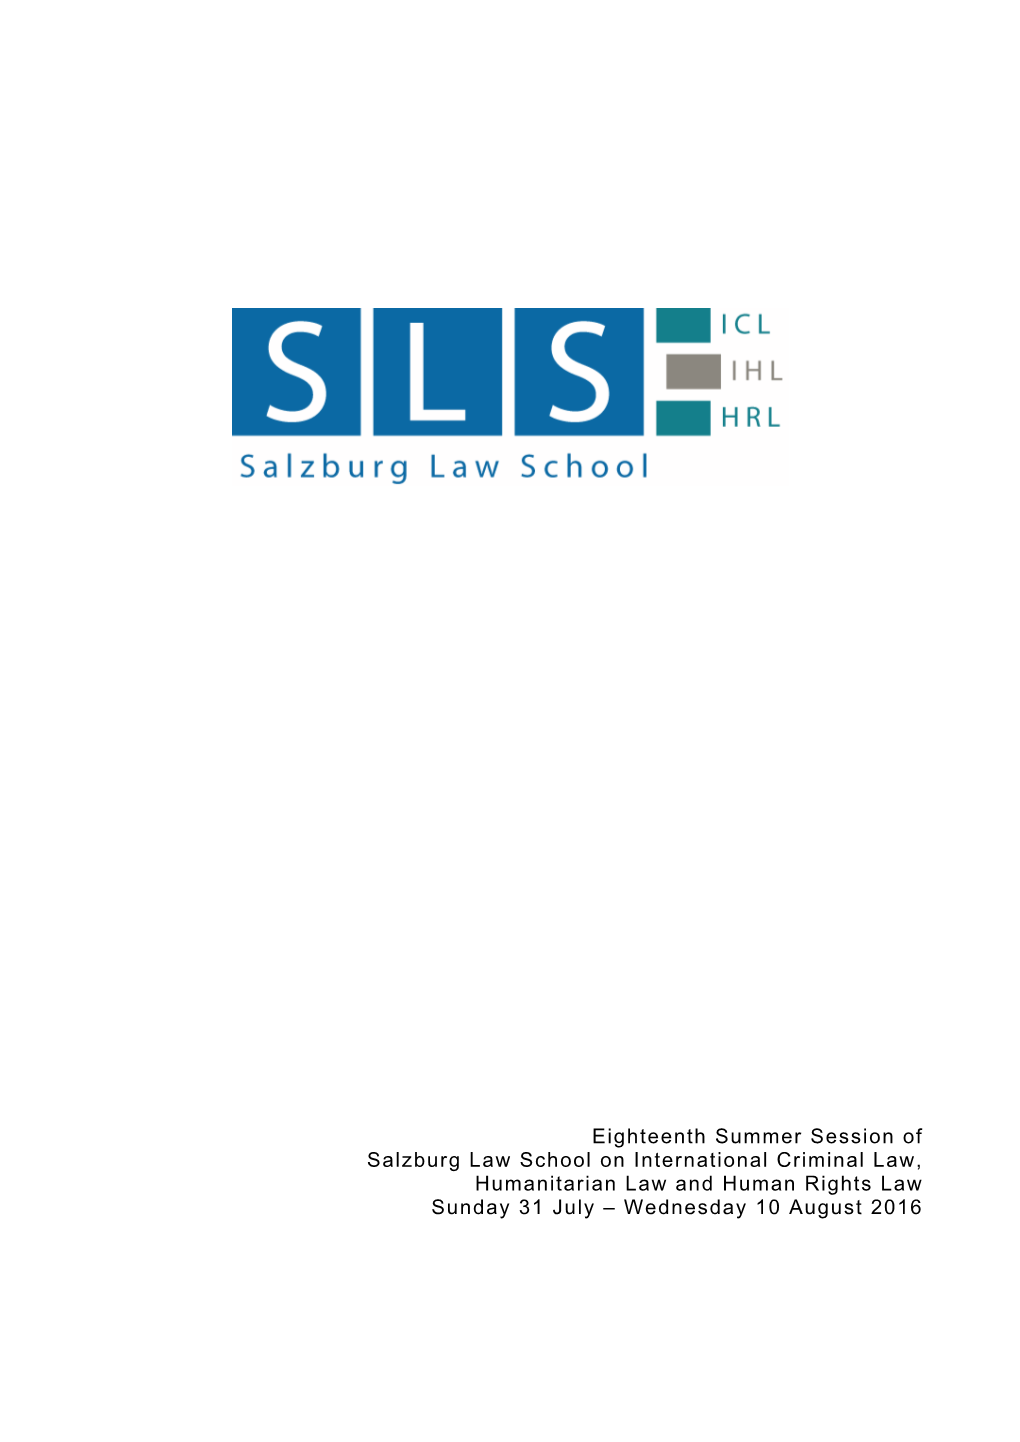 Eighteenth Summer Session of Salzburg Law School on International Criminal Law, Humanitarian Law and Human Rights Law Sunday 31 July – Wednesday 10 August 2016